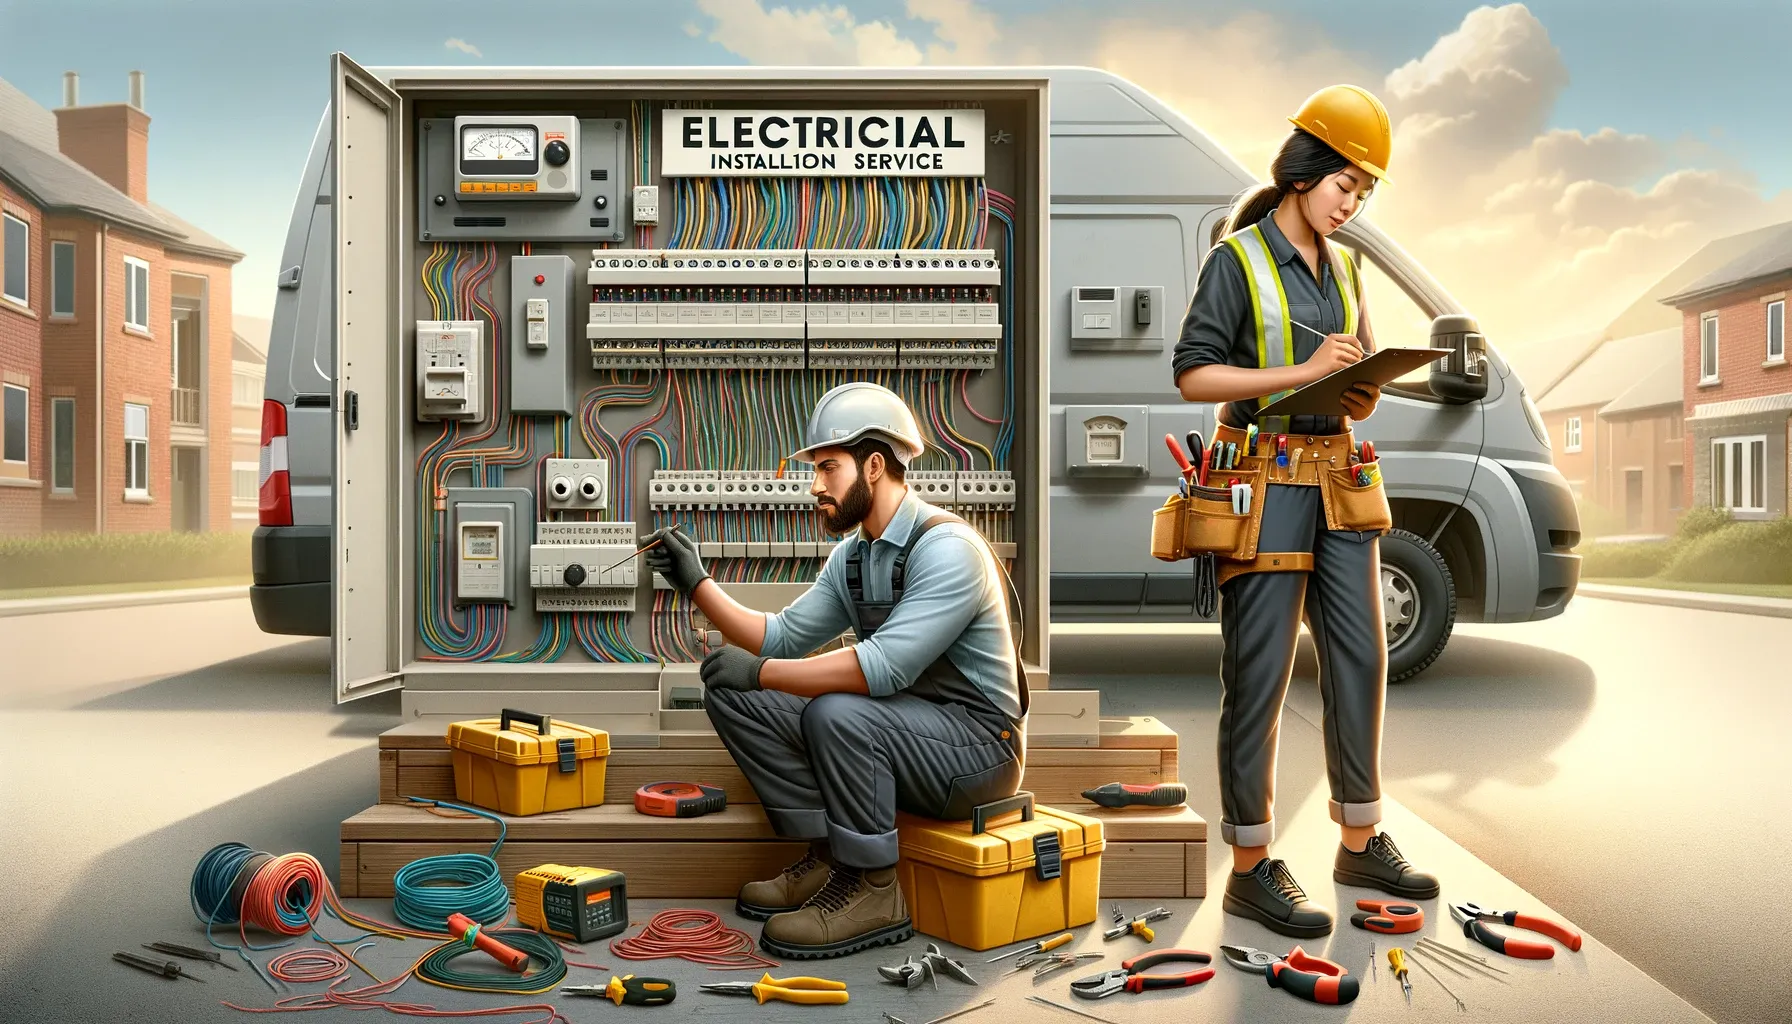 How to Choose the Right Electrical Installation Service for Your Needs